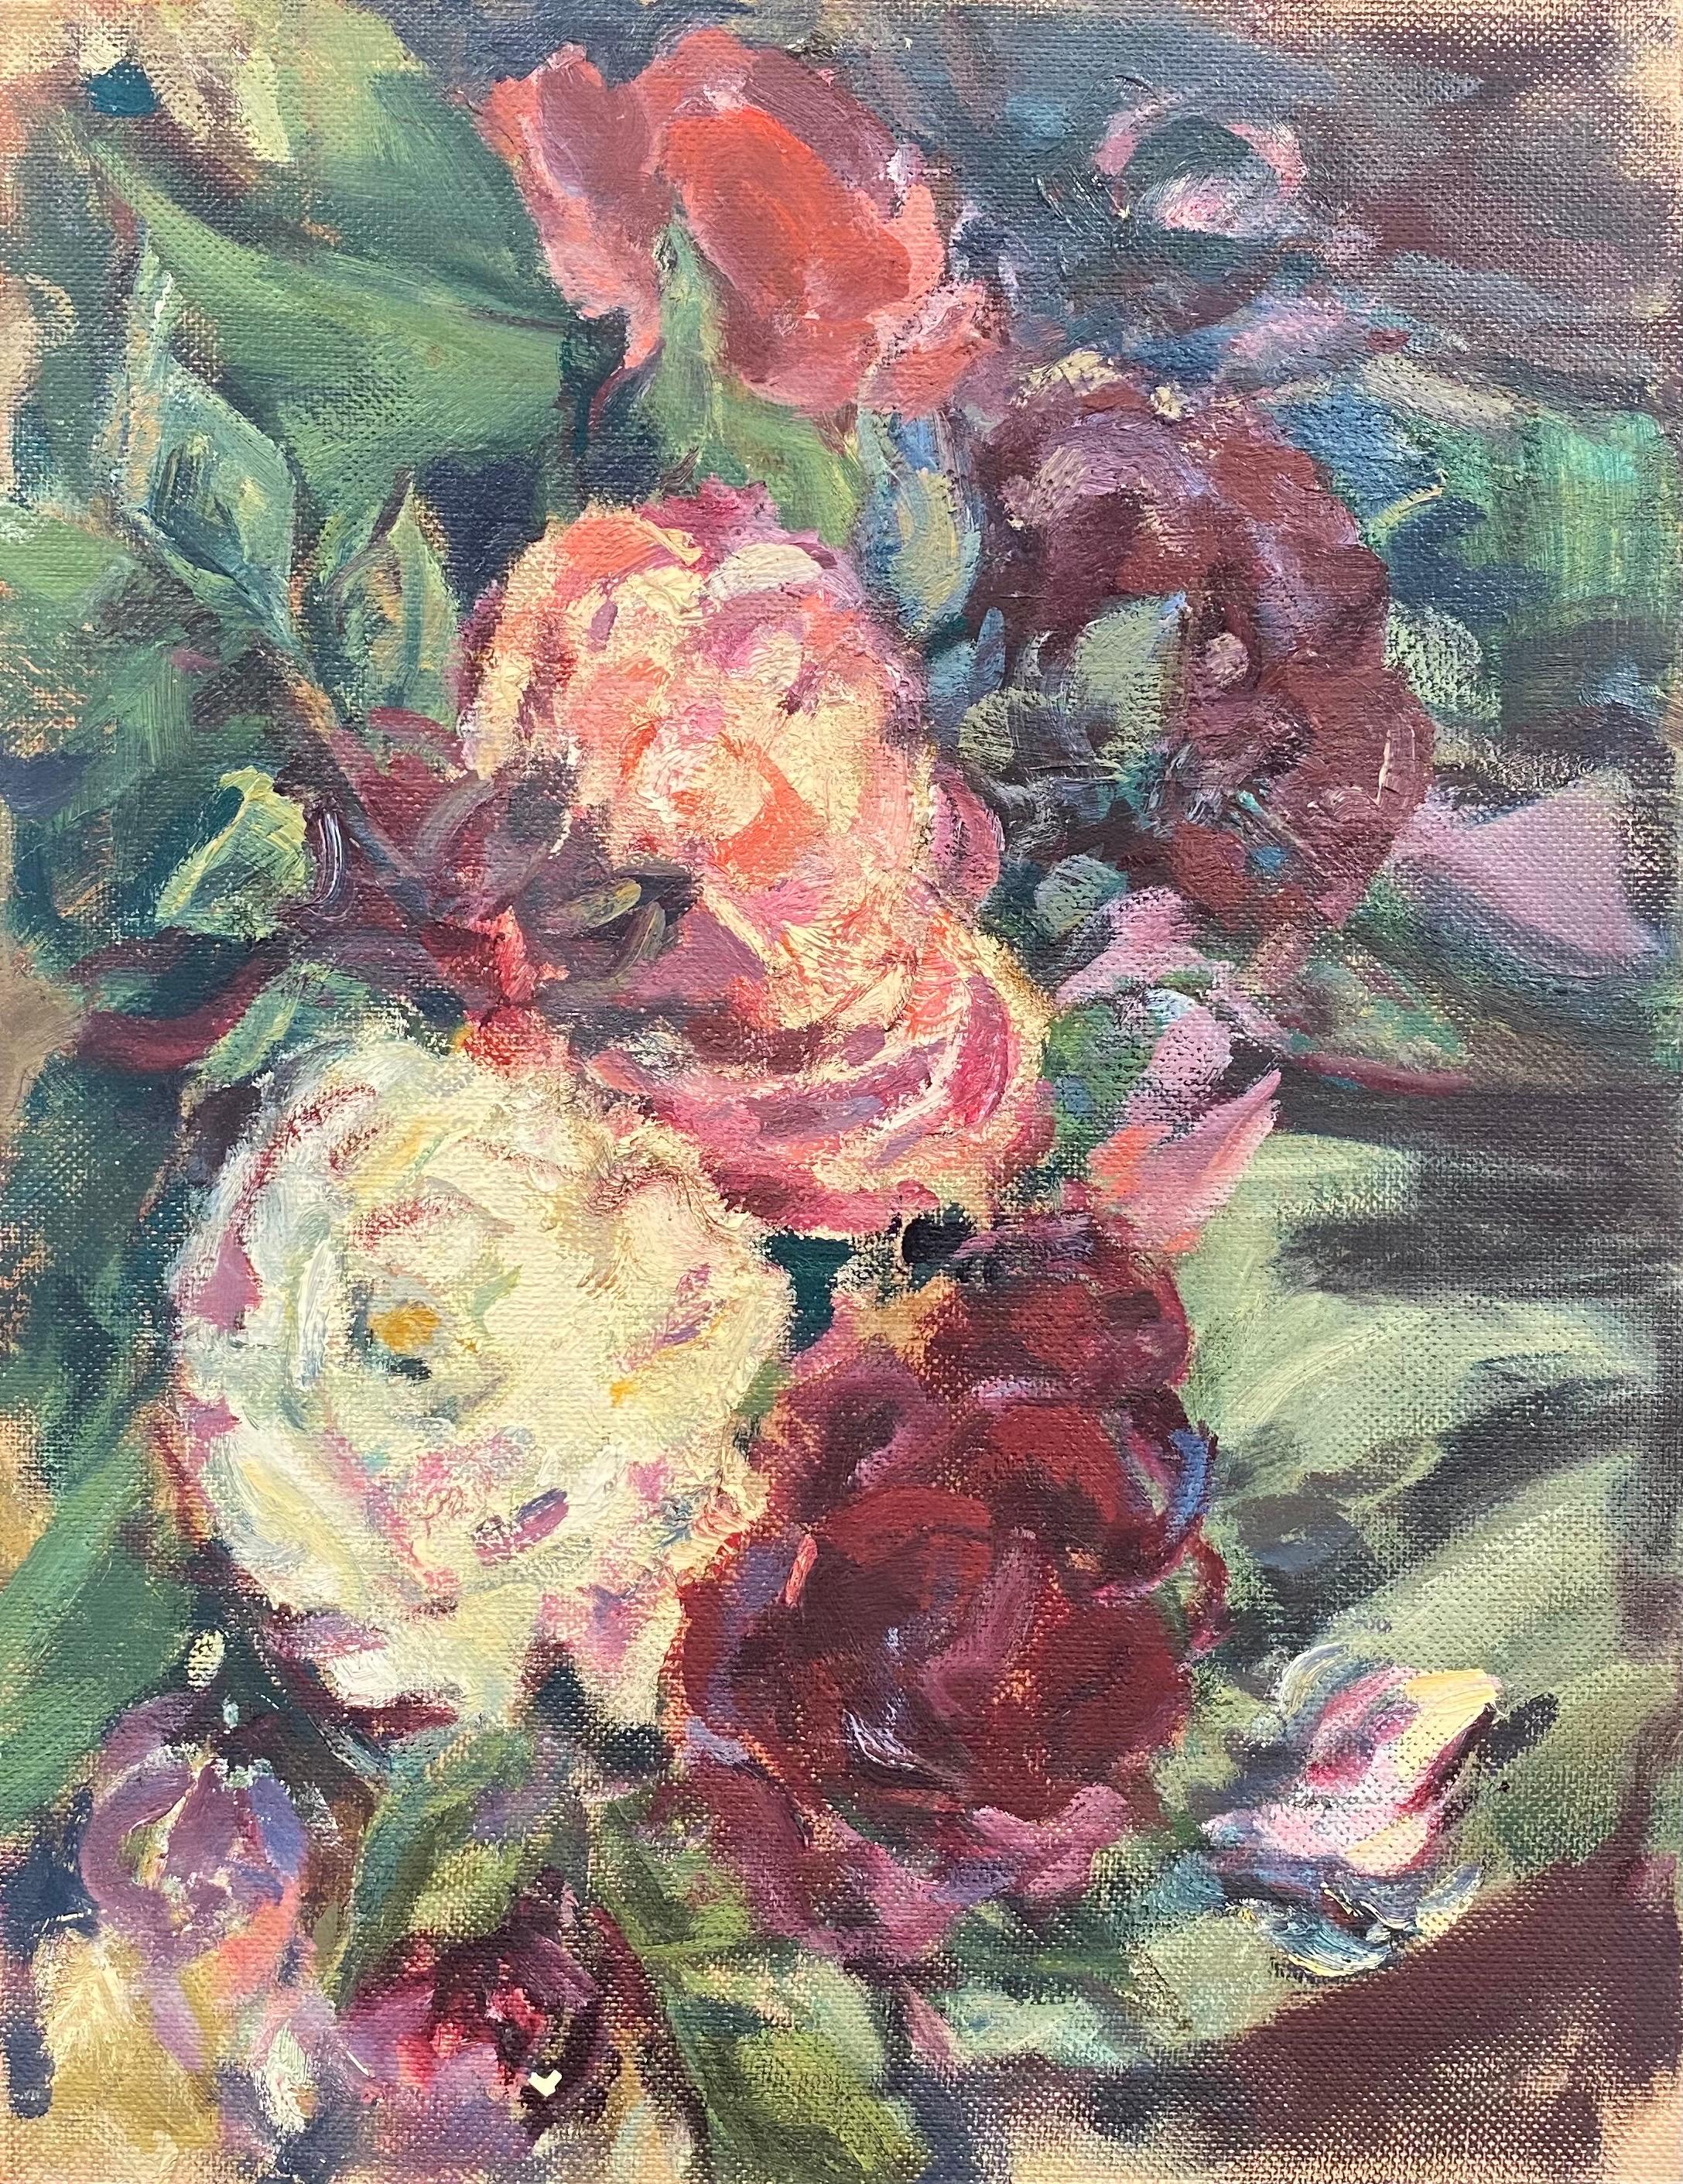 Elisabeth Hahn Abstract Painting - 20th Century German Modernist Oil Painting Still Life of Colorful Flowers